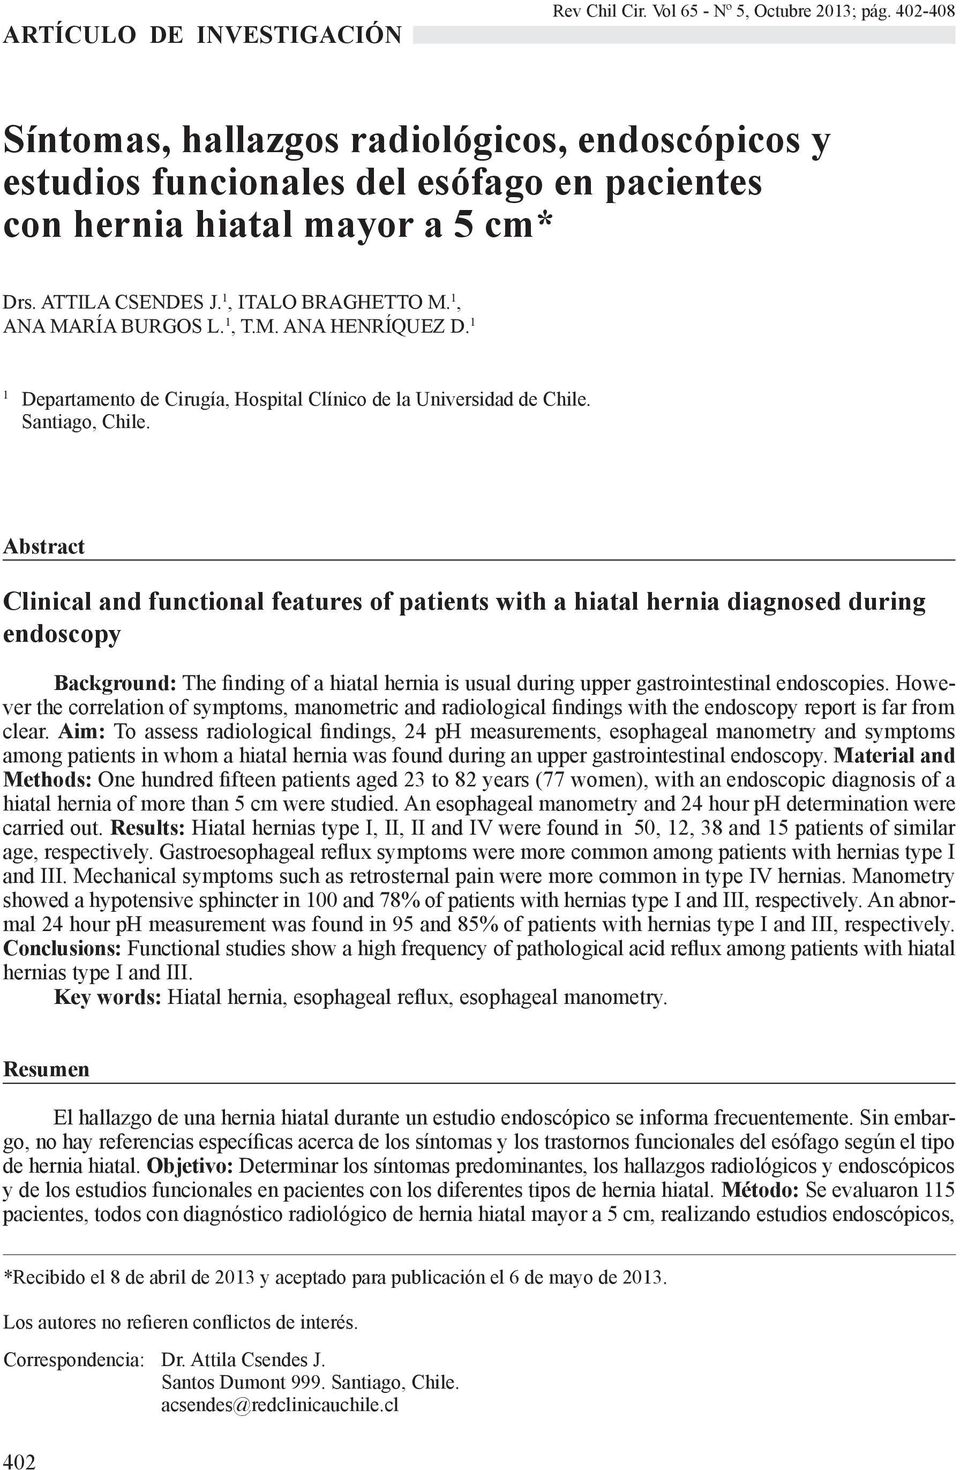 Abstract Clinical and functional features of patients with a hiatal hernia diagnosed during endoscopy Background: The finding of a hiatal hernia is usual during upper gastrointestinal endoscopies.